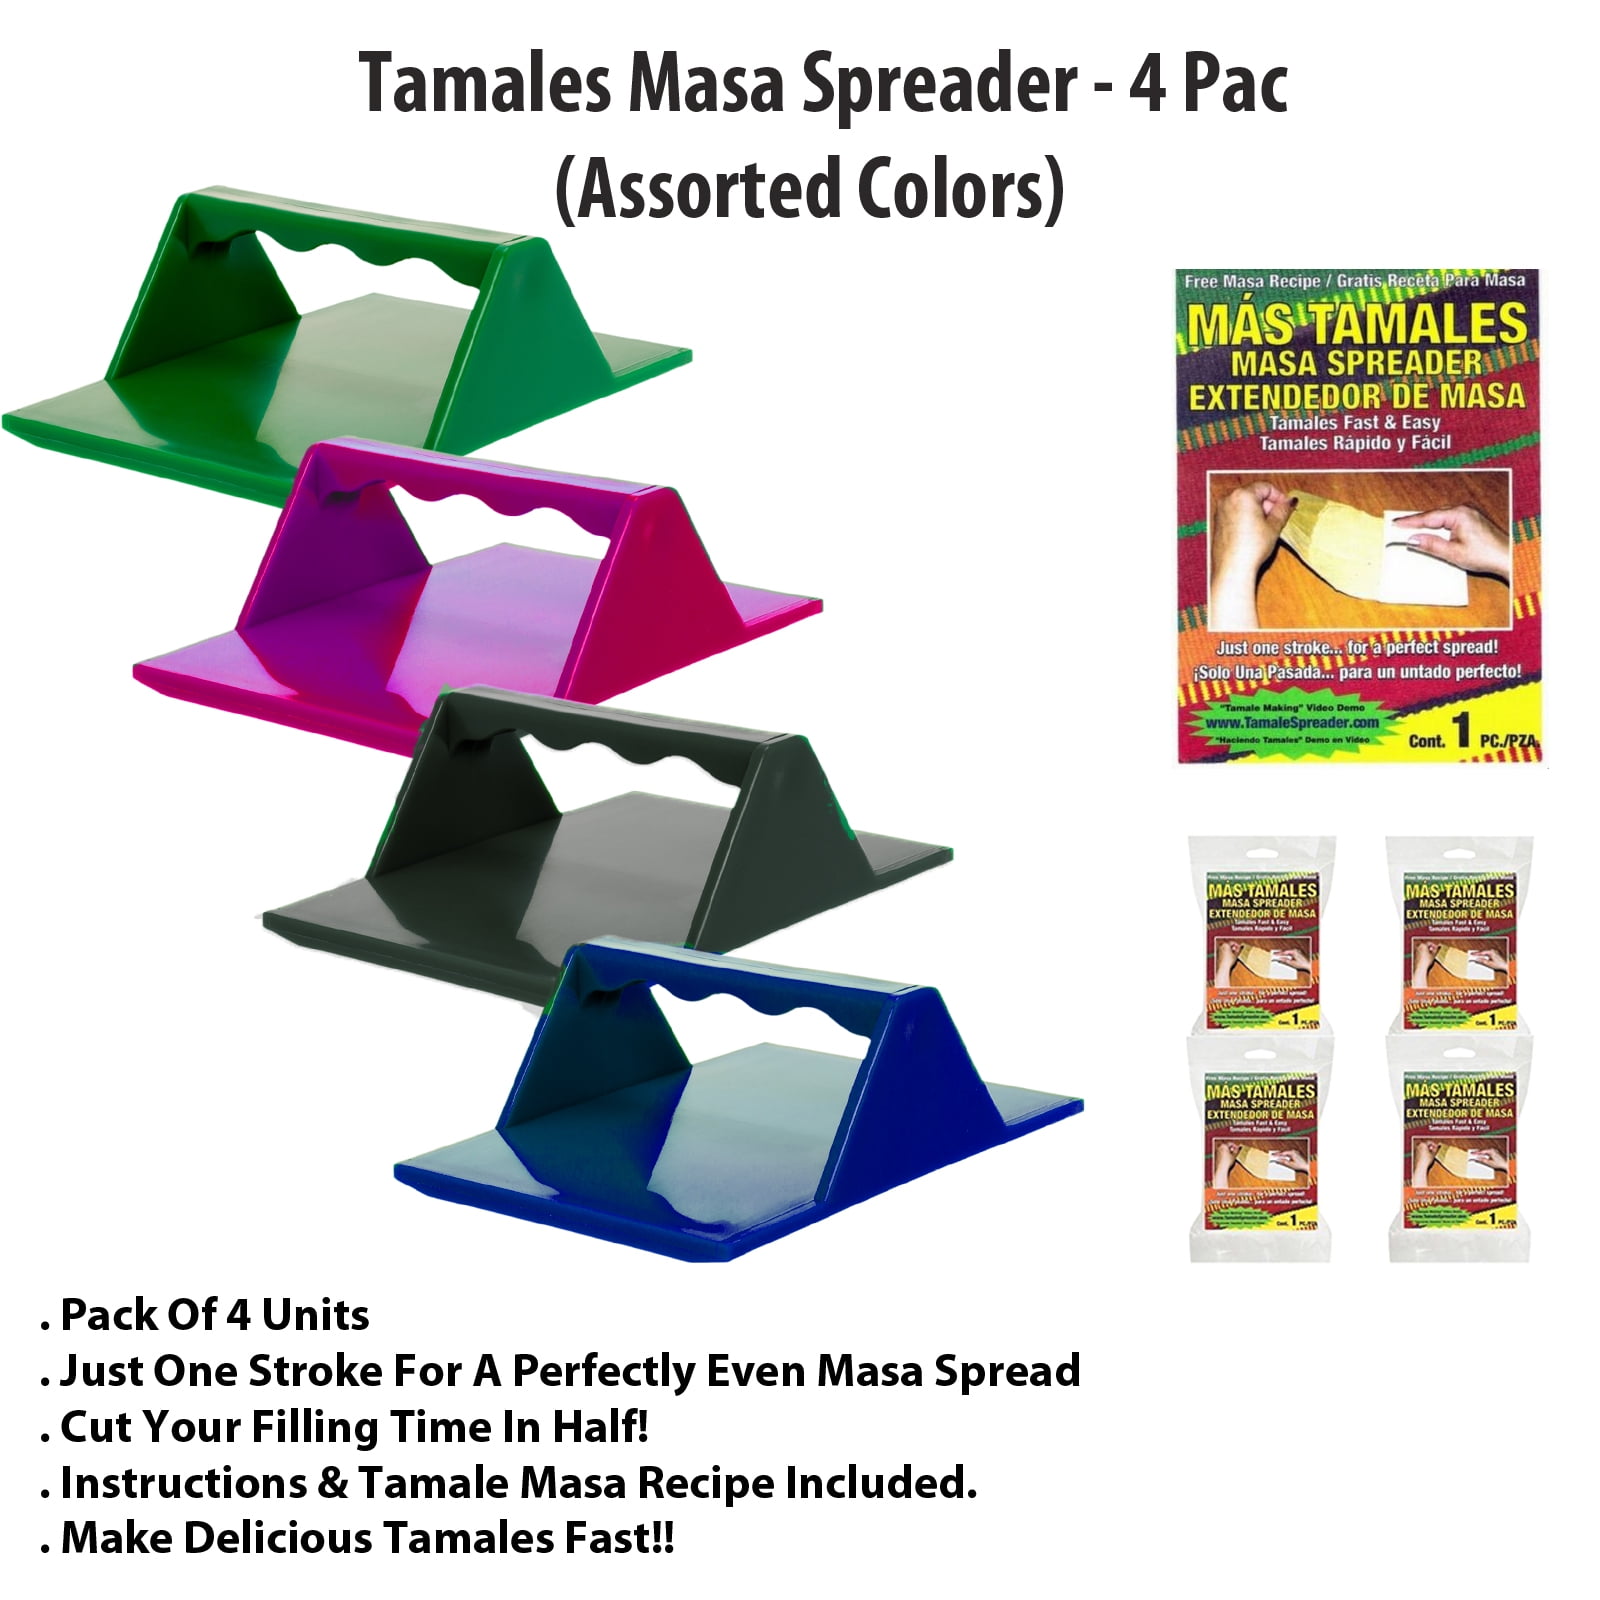 Mex-sales Tamales MAS Spreader and Tucker Ties Combo, Men's, Size: One size, Assorted